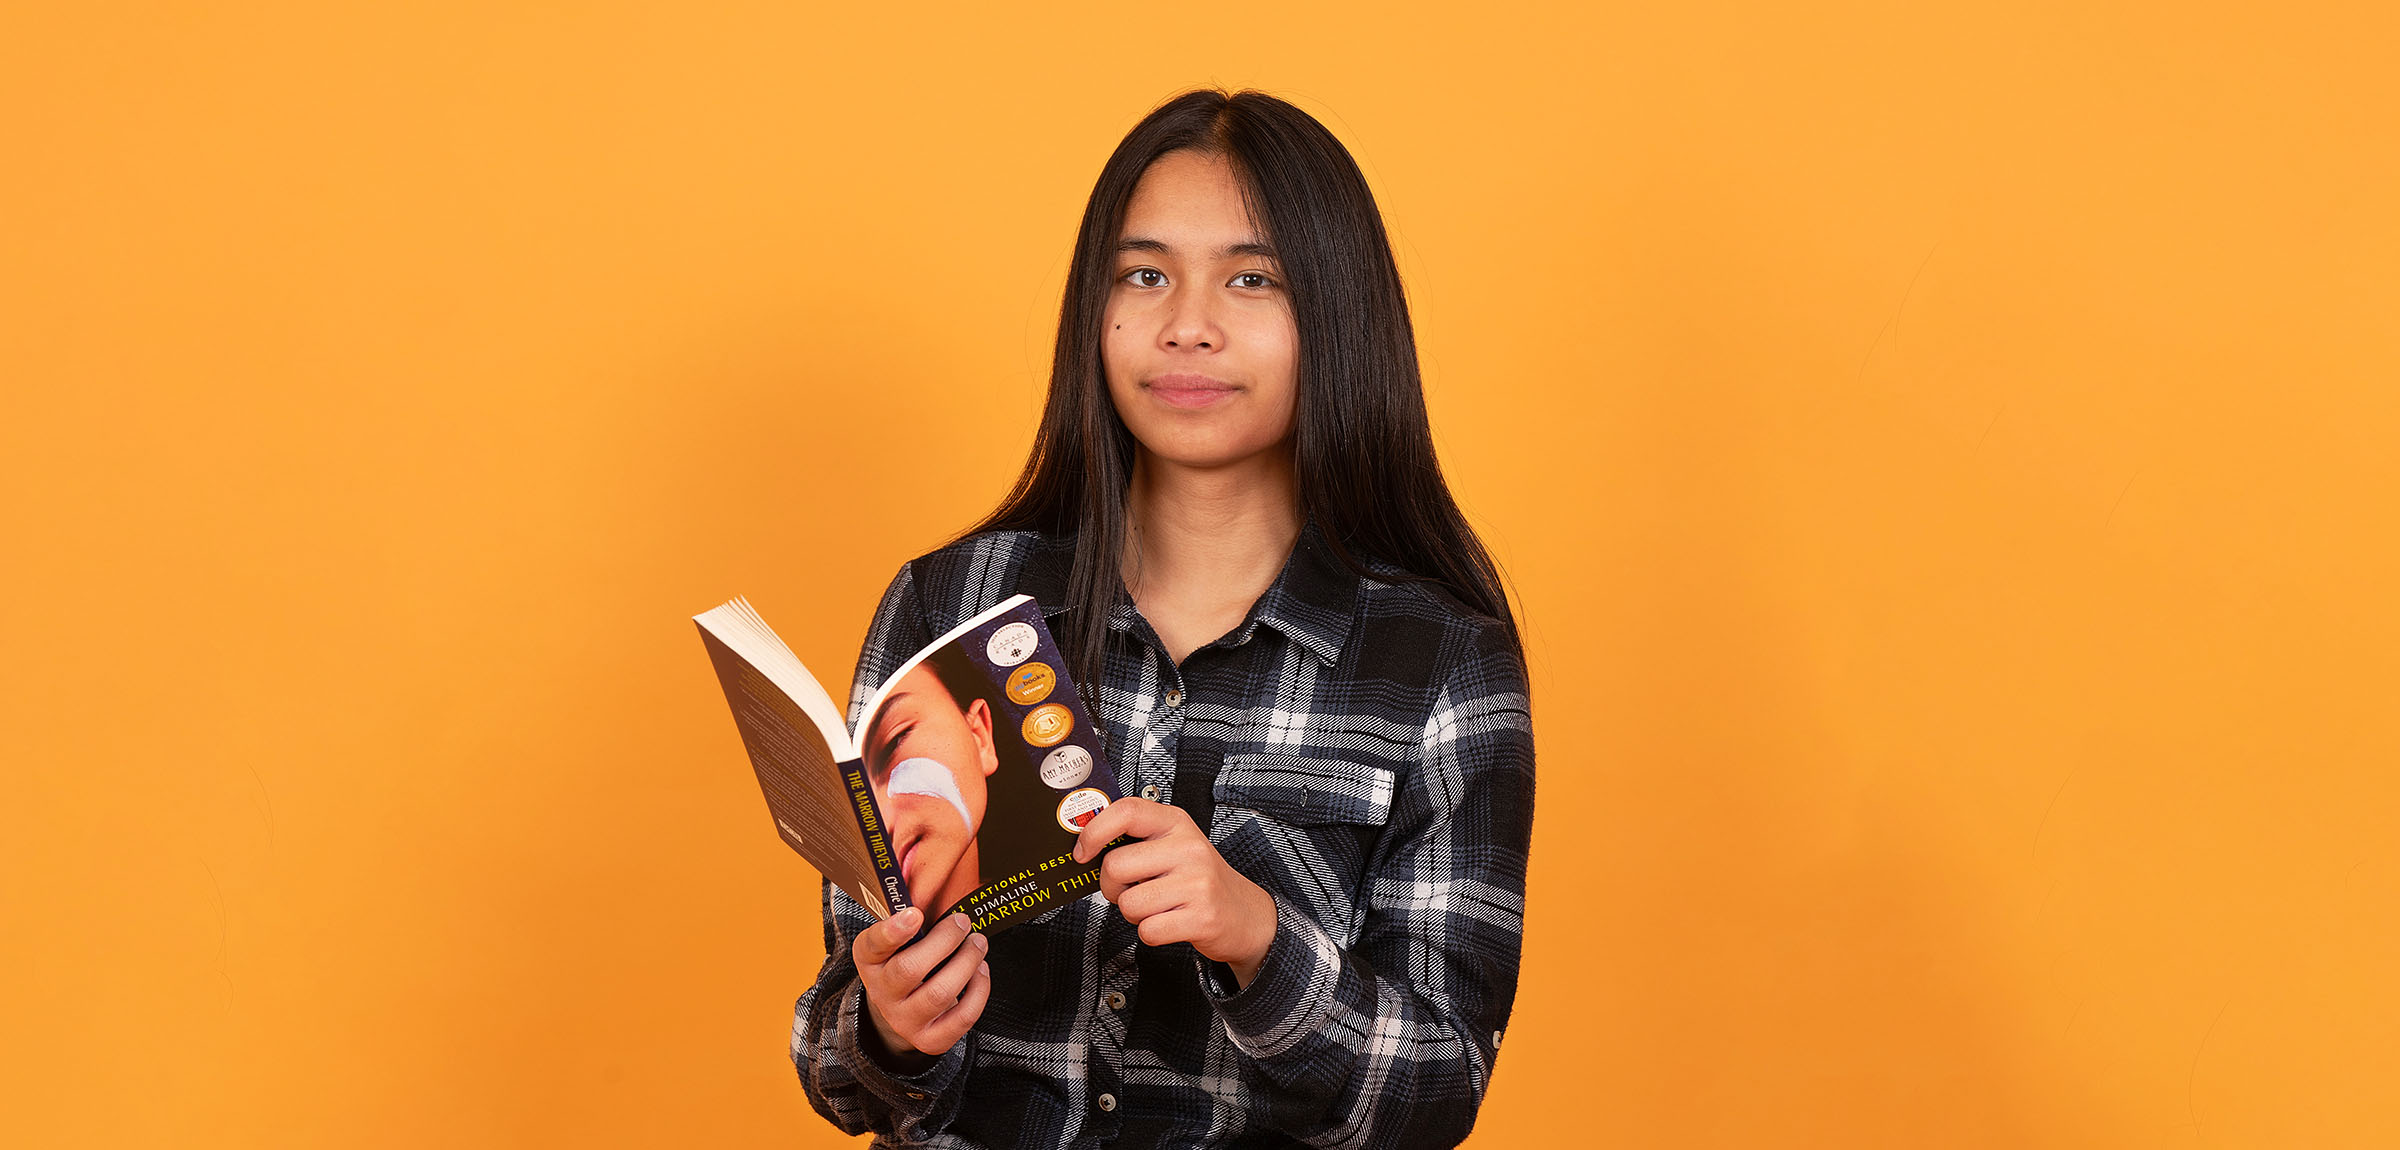 Boy with long dark hair wearing a black plaid shirt reading a book infront of an orange wall